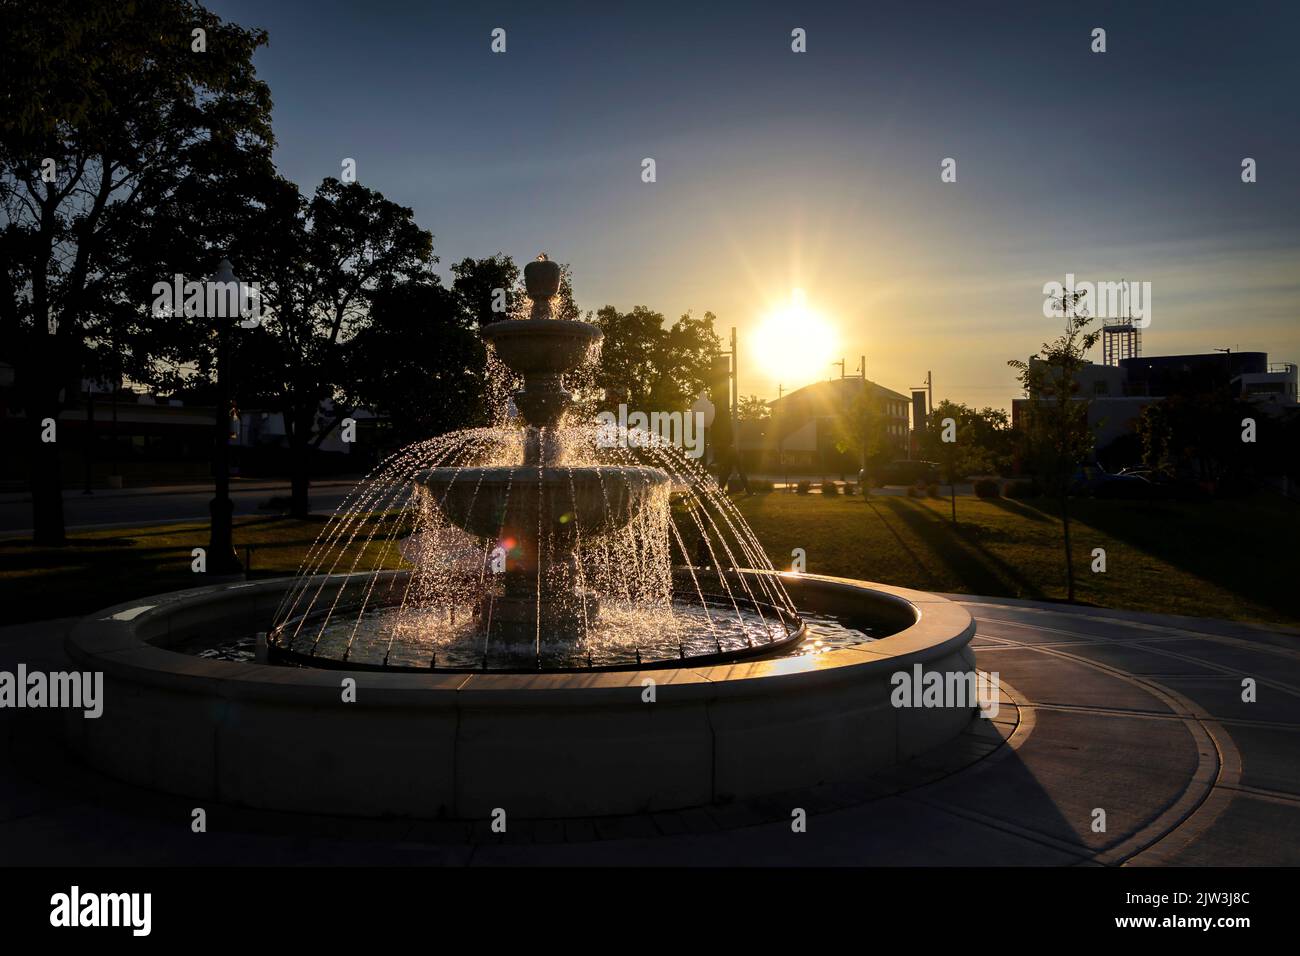 The morning sun warms a fountain in the downtown area of Manitowoc, Wisconsin. Stock Photo